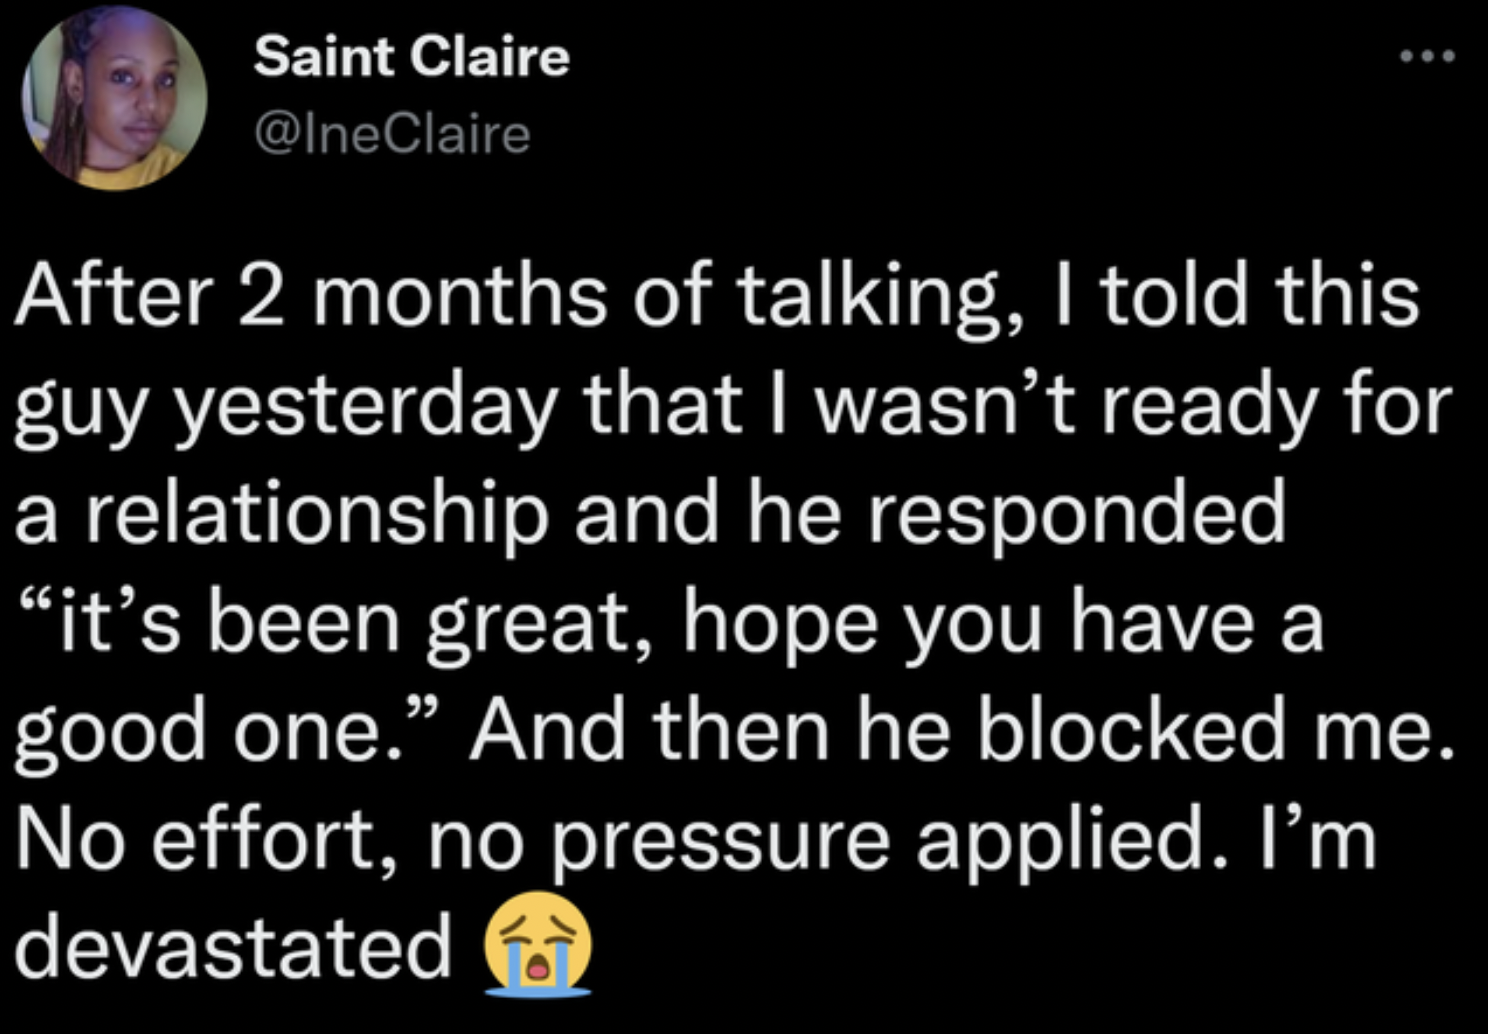 Freaky Fails and Facepalms - fter 2 months of talking, I told this guy yesterday that I wasn't ready for a relationship and he responded